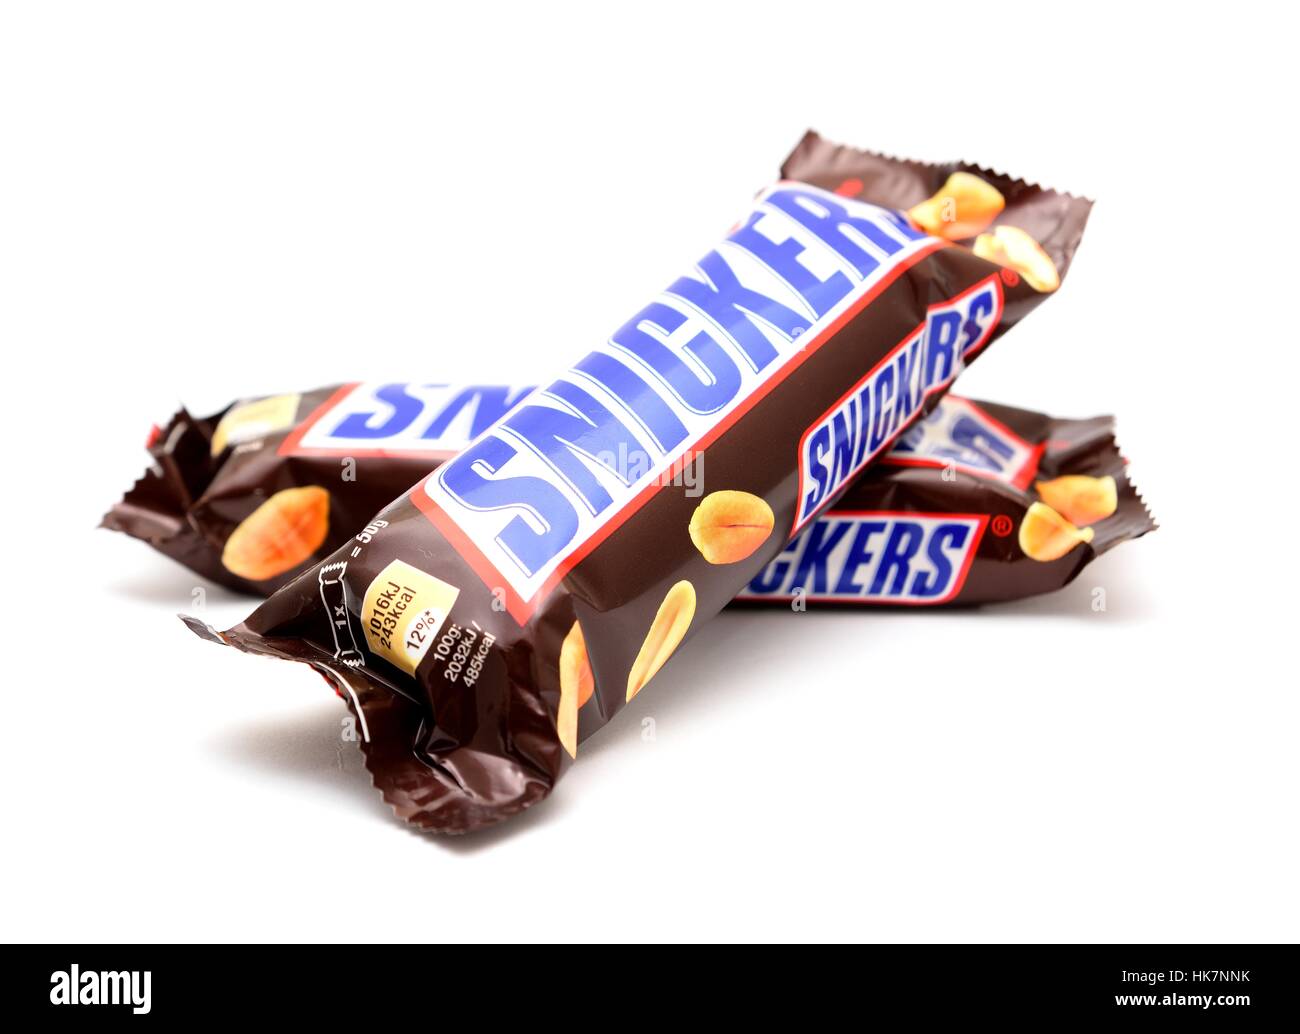 Two wrapped Snickers chocolate bars on white background. Stock Photo